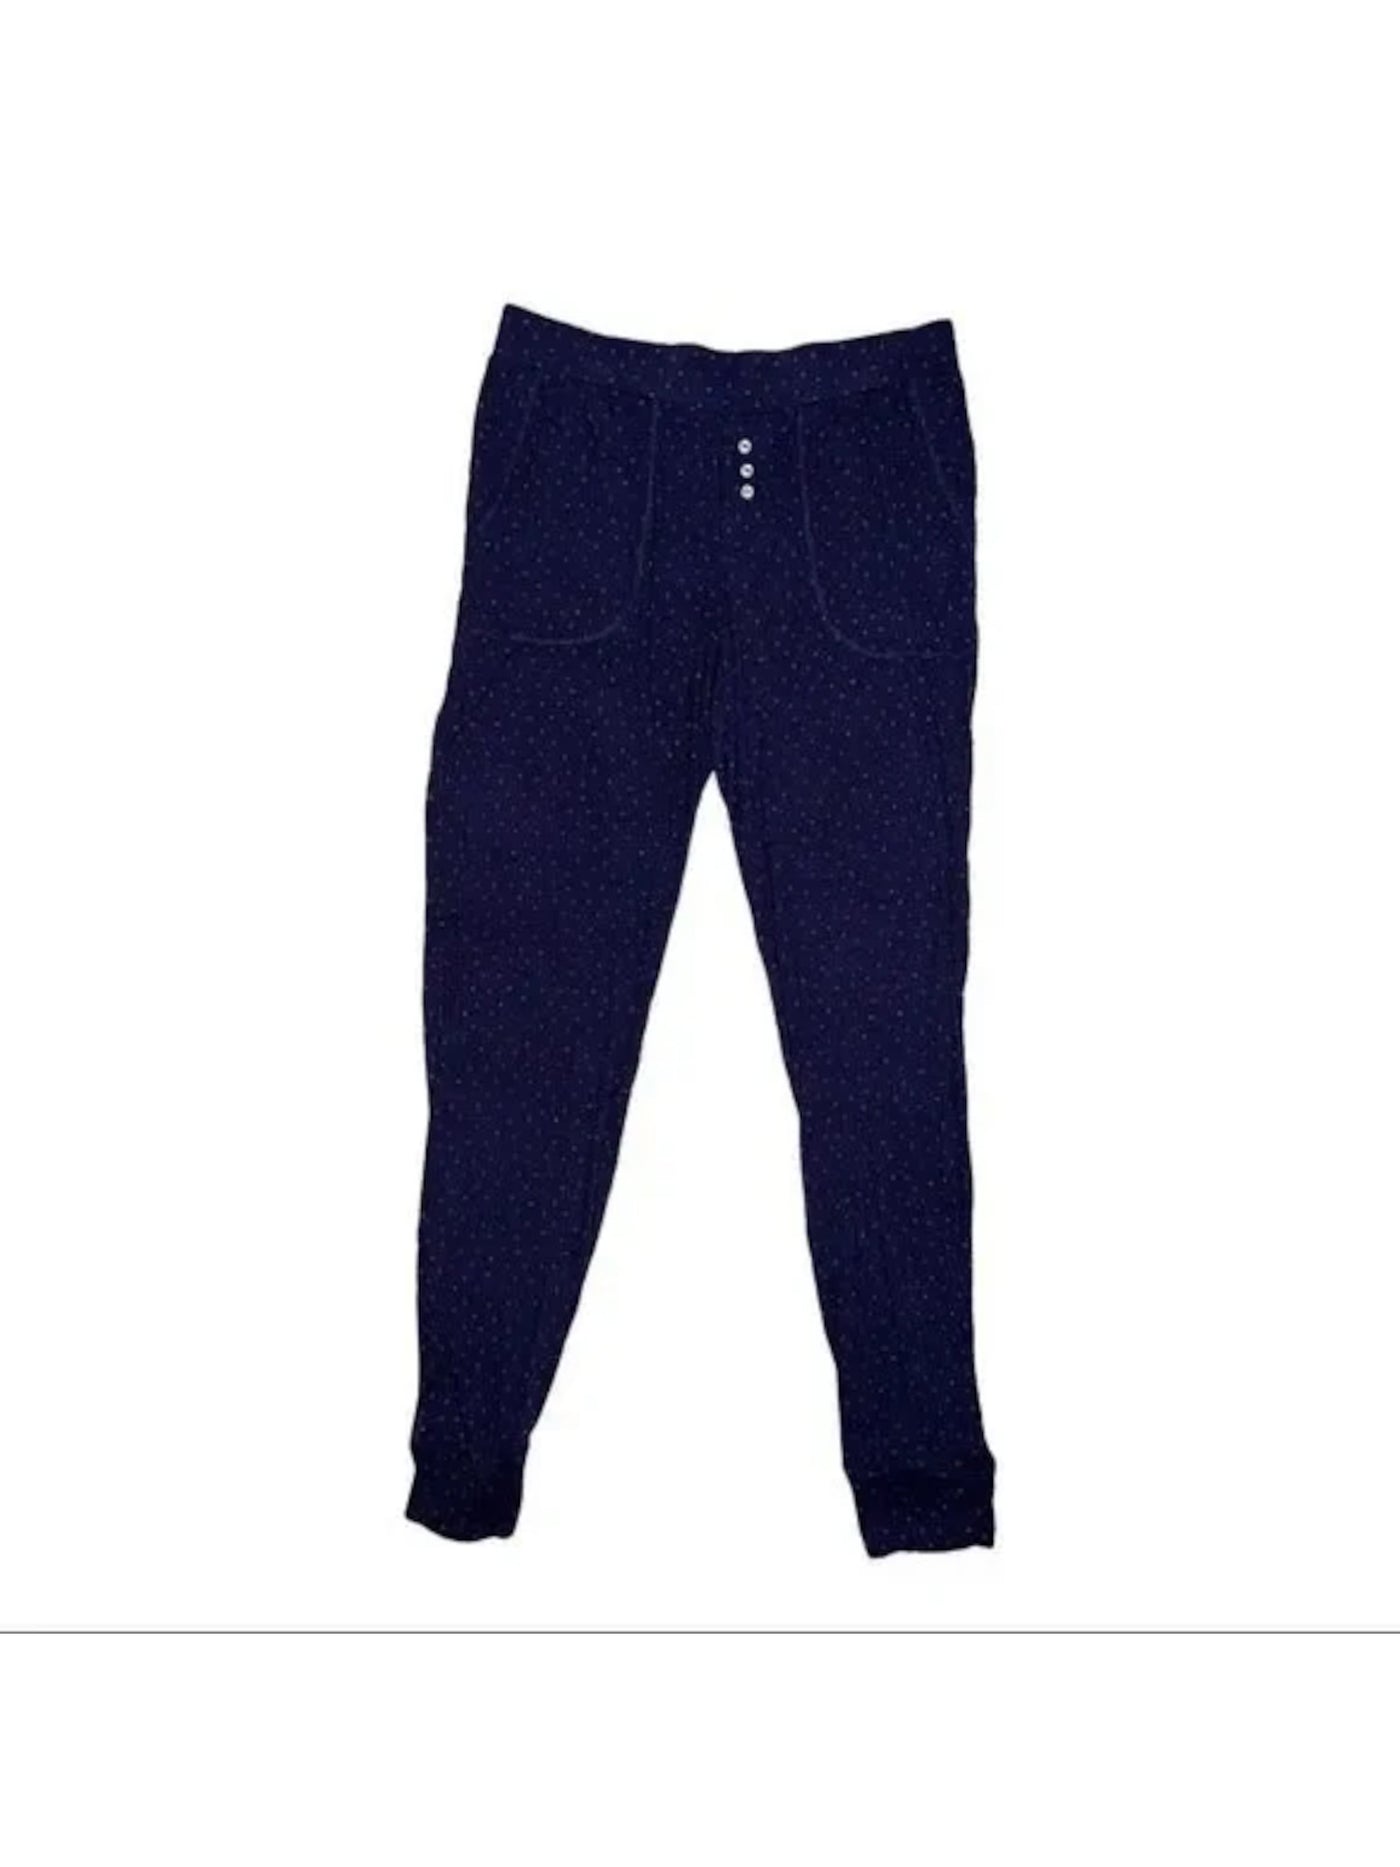 ALFANI Intimates Navy Pocketed Pull On Faux Button Fly Cuffed Sleep Pants XS